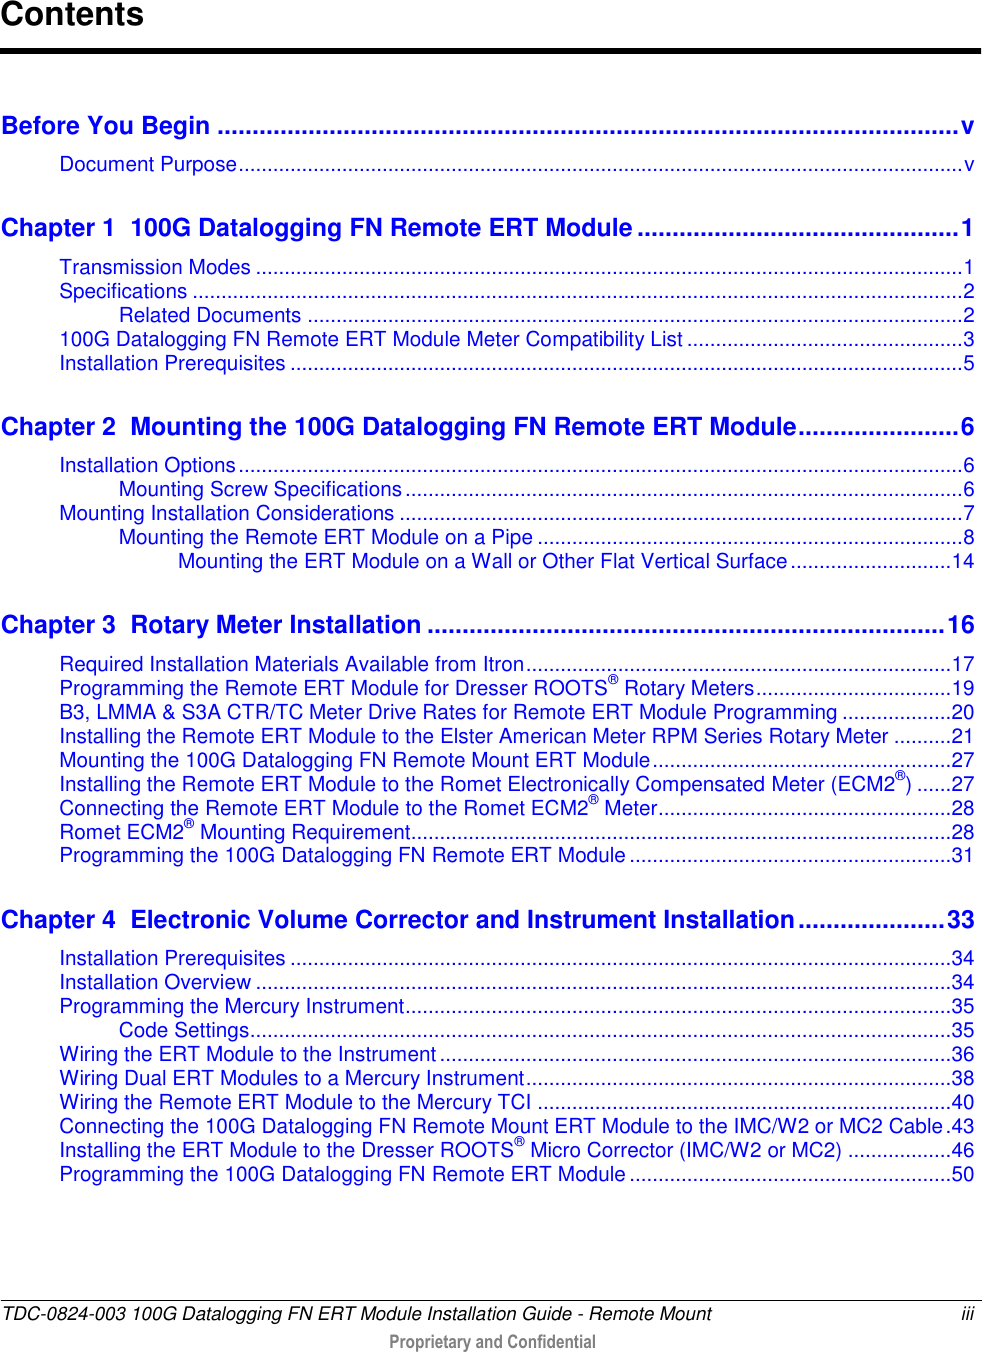  TDC-0824-003 100G Datalogging FN ERT Module Installation Guide - Remote Mount  iii   Proprietary and Confidential     Before You Begin .......................................................................................................... v Document Purpose .............................................................................................................................. v Chapter 1  100G Datalogging FN Remote ERT Module .............................................. 1 Transmission Modes ........................................................................................................................... 1 Specifications ...................................................................................................................................... 2 Related Documents .................................................................................................................. 2 100G Datalogging FN Remote ERT Module Meter Compatibility List ................................................ 3 Installation Prerequisites ..................................................................................................................... 5 Chapter 2  Mounting the 100G Datalogging FN Remote ERT Module ....................... 6 Installation Options .............................................................................................................................. 6 Mounting Screw Specifications ................................................................................................. 6 Mounting Installation Considerations .................................................................................................. 7 Mounting the Remote ERT Module on a Pipe .......................................................................... 8 Mounting the ERT Module on a Wall or Other Flat Vertical Surface ............................ 14 Chapter 3  Rotary Meter Installation .......................................................................... 16 Required Installation Materials Available from Itron .......................................................................... 17 Programming the Remote ERT Module for Dresser ROOTS® Rotary Meters .................................. 19 B3, LMMA &amp; S3A CTR/TC Meter Drive Rates for Remote ERT Module Programming ................... 20 Installing the Remote ERT Module to the Elster American Meter RPM Series Rotary Meter .......... 21 Mounting the 100G Datalogging FN Remote Mount ERT Module .................................................... 27 Installing the Remote ERT Module to the Romet Electronically Compensated Meter (ECM2®) ...... 27 Connecting the Remote ERT Module to the Romet ECM2® Meter ................................................... 28 Romet ECM2® Mounting Requirement.............................................................................................. 28 Programming the 100G Datalogging FN Remote ERT Module ........................................................ 31 Chapter 4  Electronic Volume Corrector and Instrument Installation ..................... 33 Installation Prerequisites ................................................................................................................... 34 Installation Overview ......................................................................................................................... 34 Programming the Mercury Instrument ............................................................................................... 35 Code Settings.......................................................................................................................... 35 Wiring the ERT Module to the Instrument ......................................................................................... 36 Wiring Dual ERT Modules to a Mercury Instrument .......................................................................... 38 Wiring the Remote ERT Module to the Mercury TCI ........................................................................ 40 Connecting the 100G Datalogging FN Remote Mount ERT Module to the IMC/W2 or MC2 Cable . 43 Installing the ERT Module to the Dresser ROOTS® Micro Corrector (IMC/W2 or MC2) .................. 46 Programming the 100G Datalogging FN Remote ERT Module ........................................................ 50 Contents 